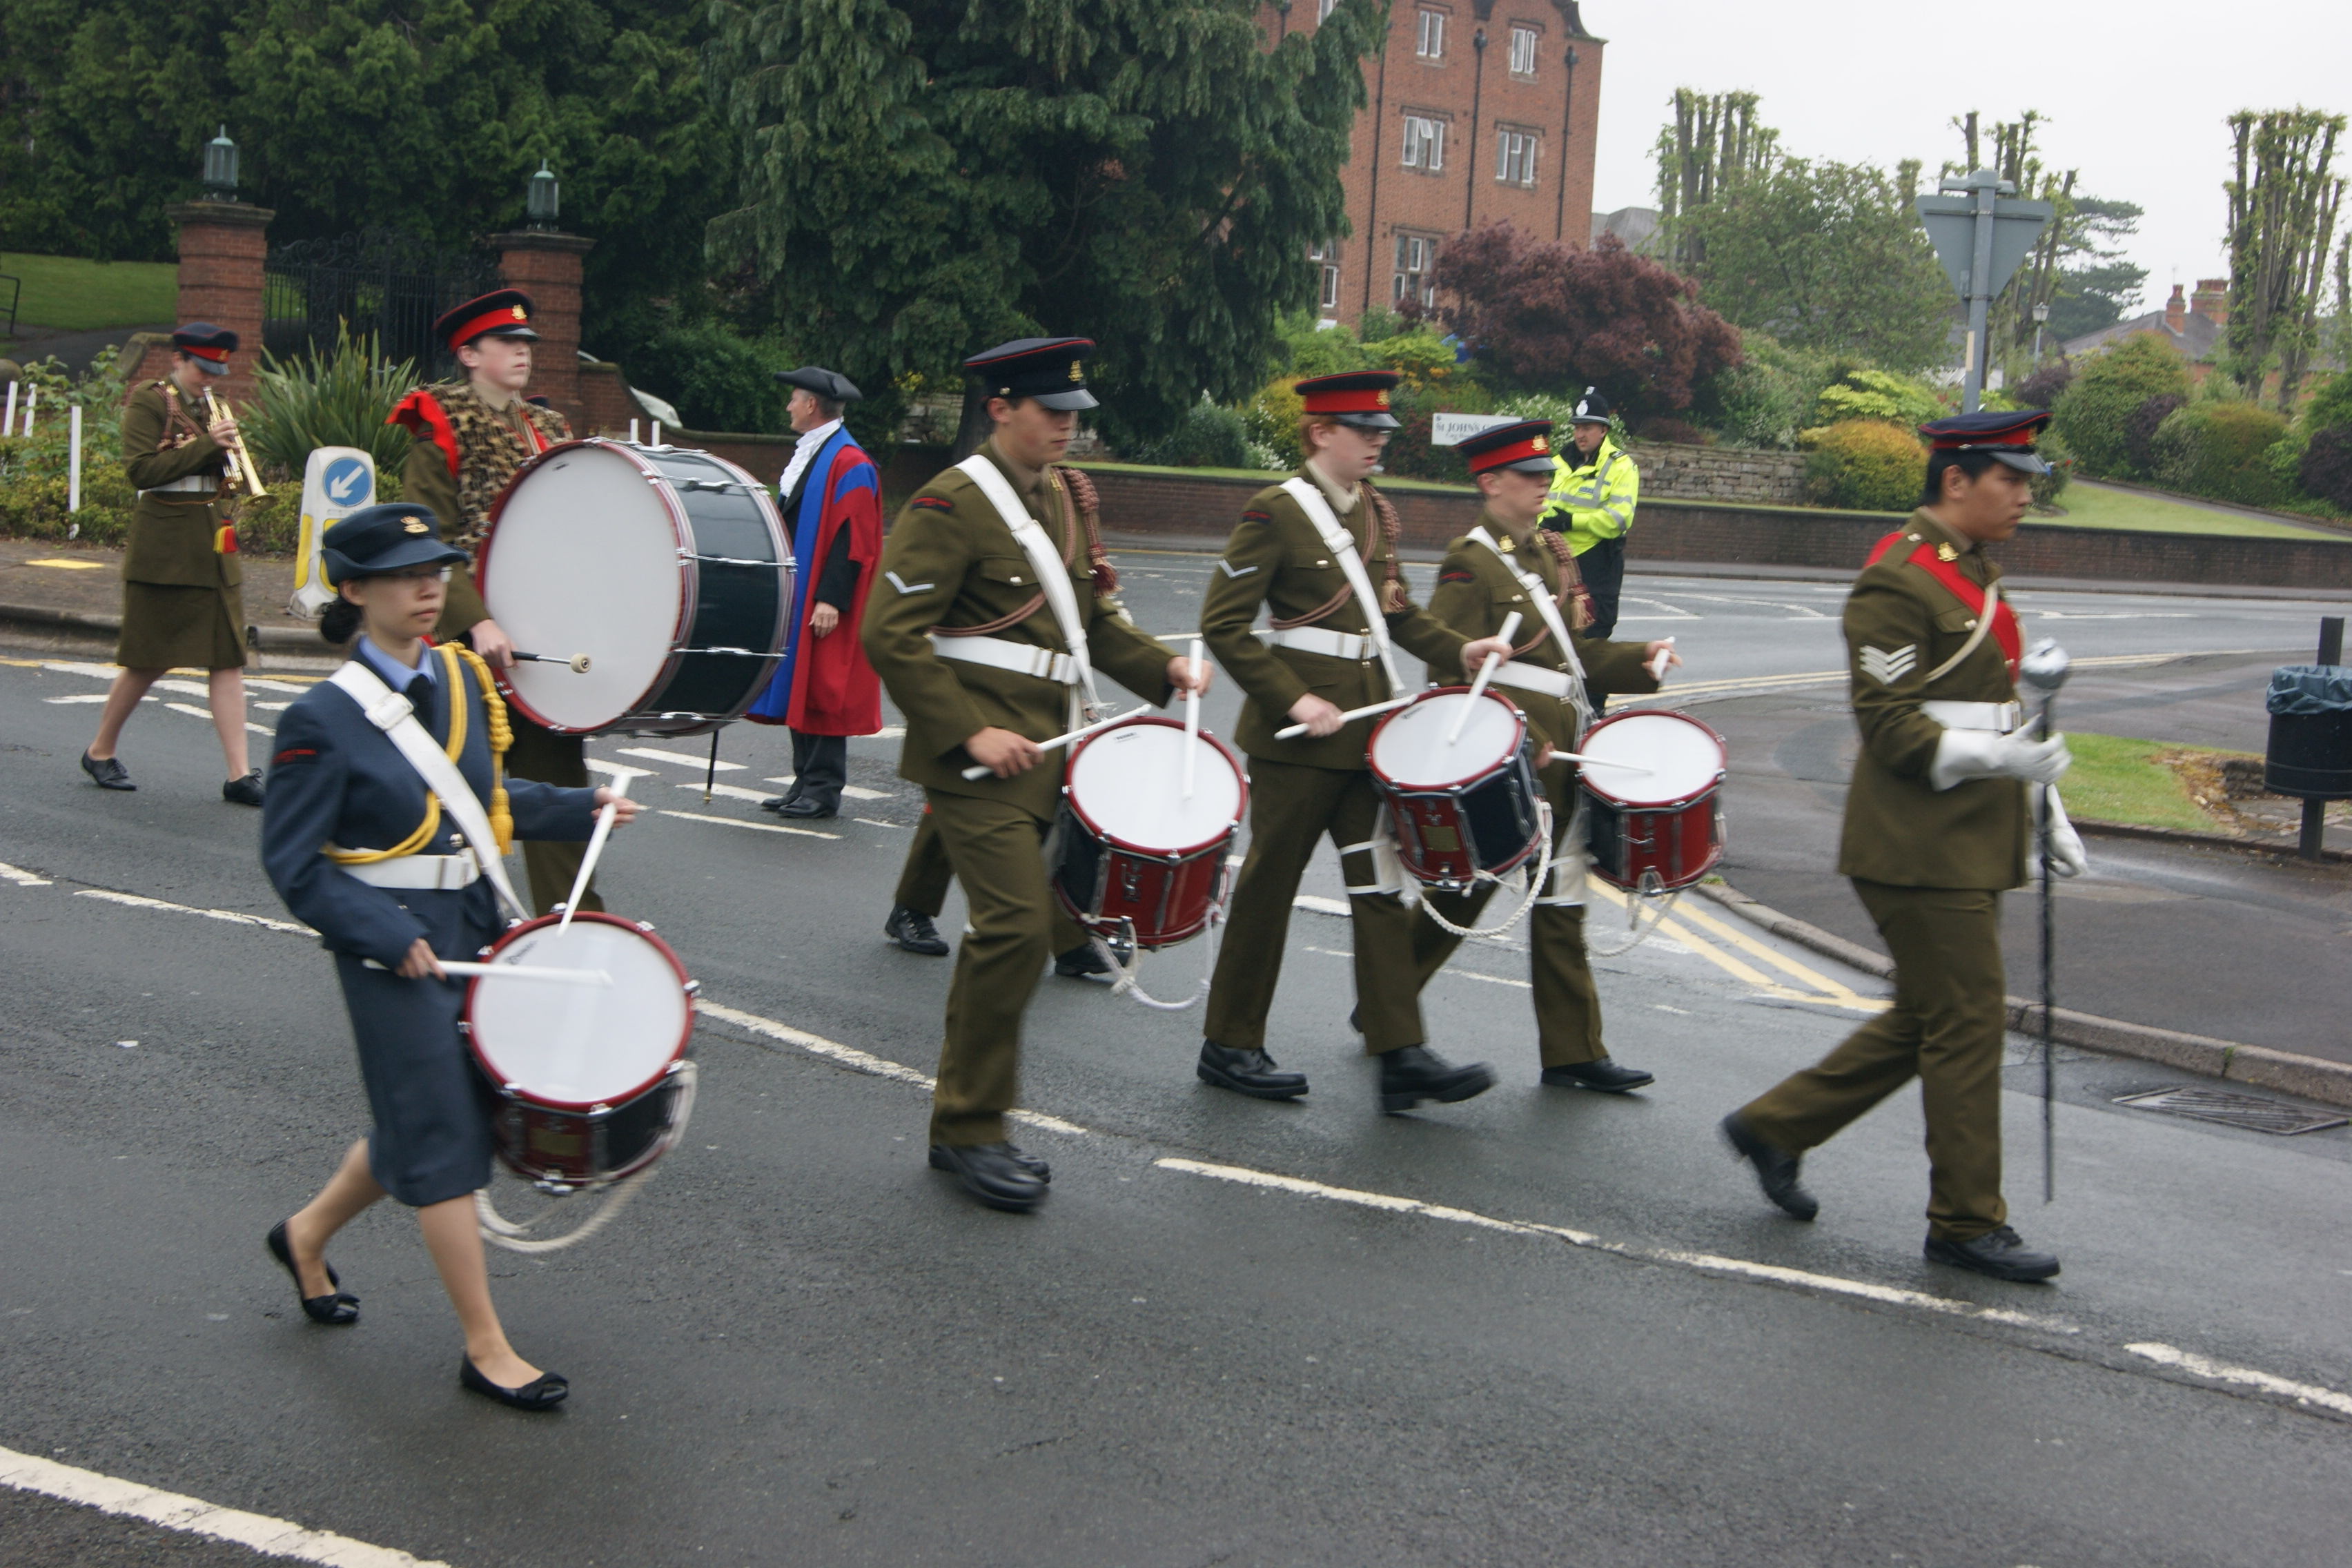 The Corps of Drums lead the procession during the Court Leet Fair Day, June 20th 2015